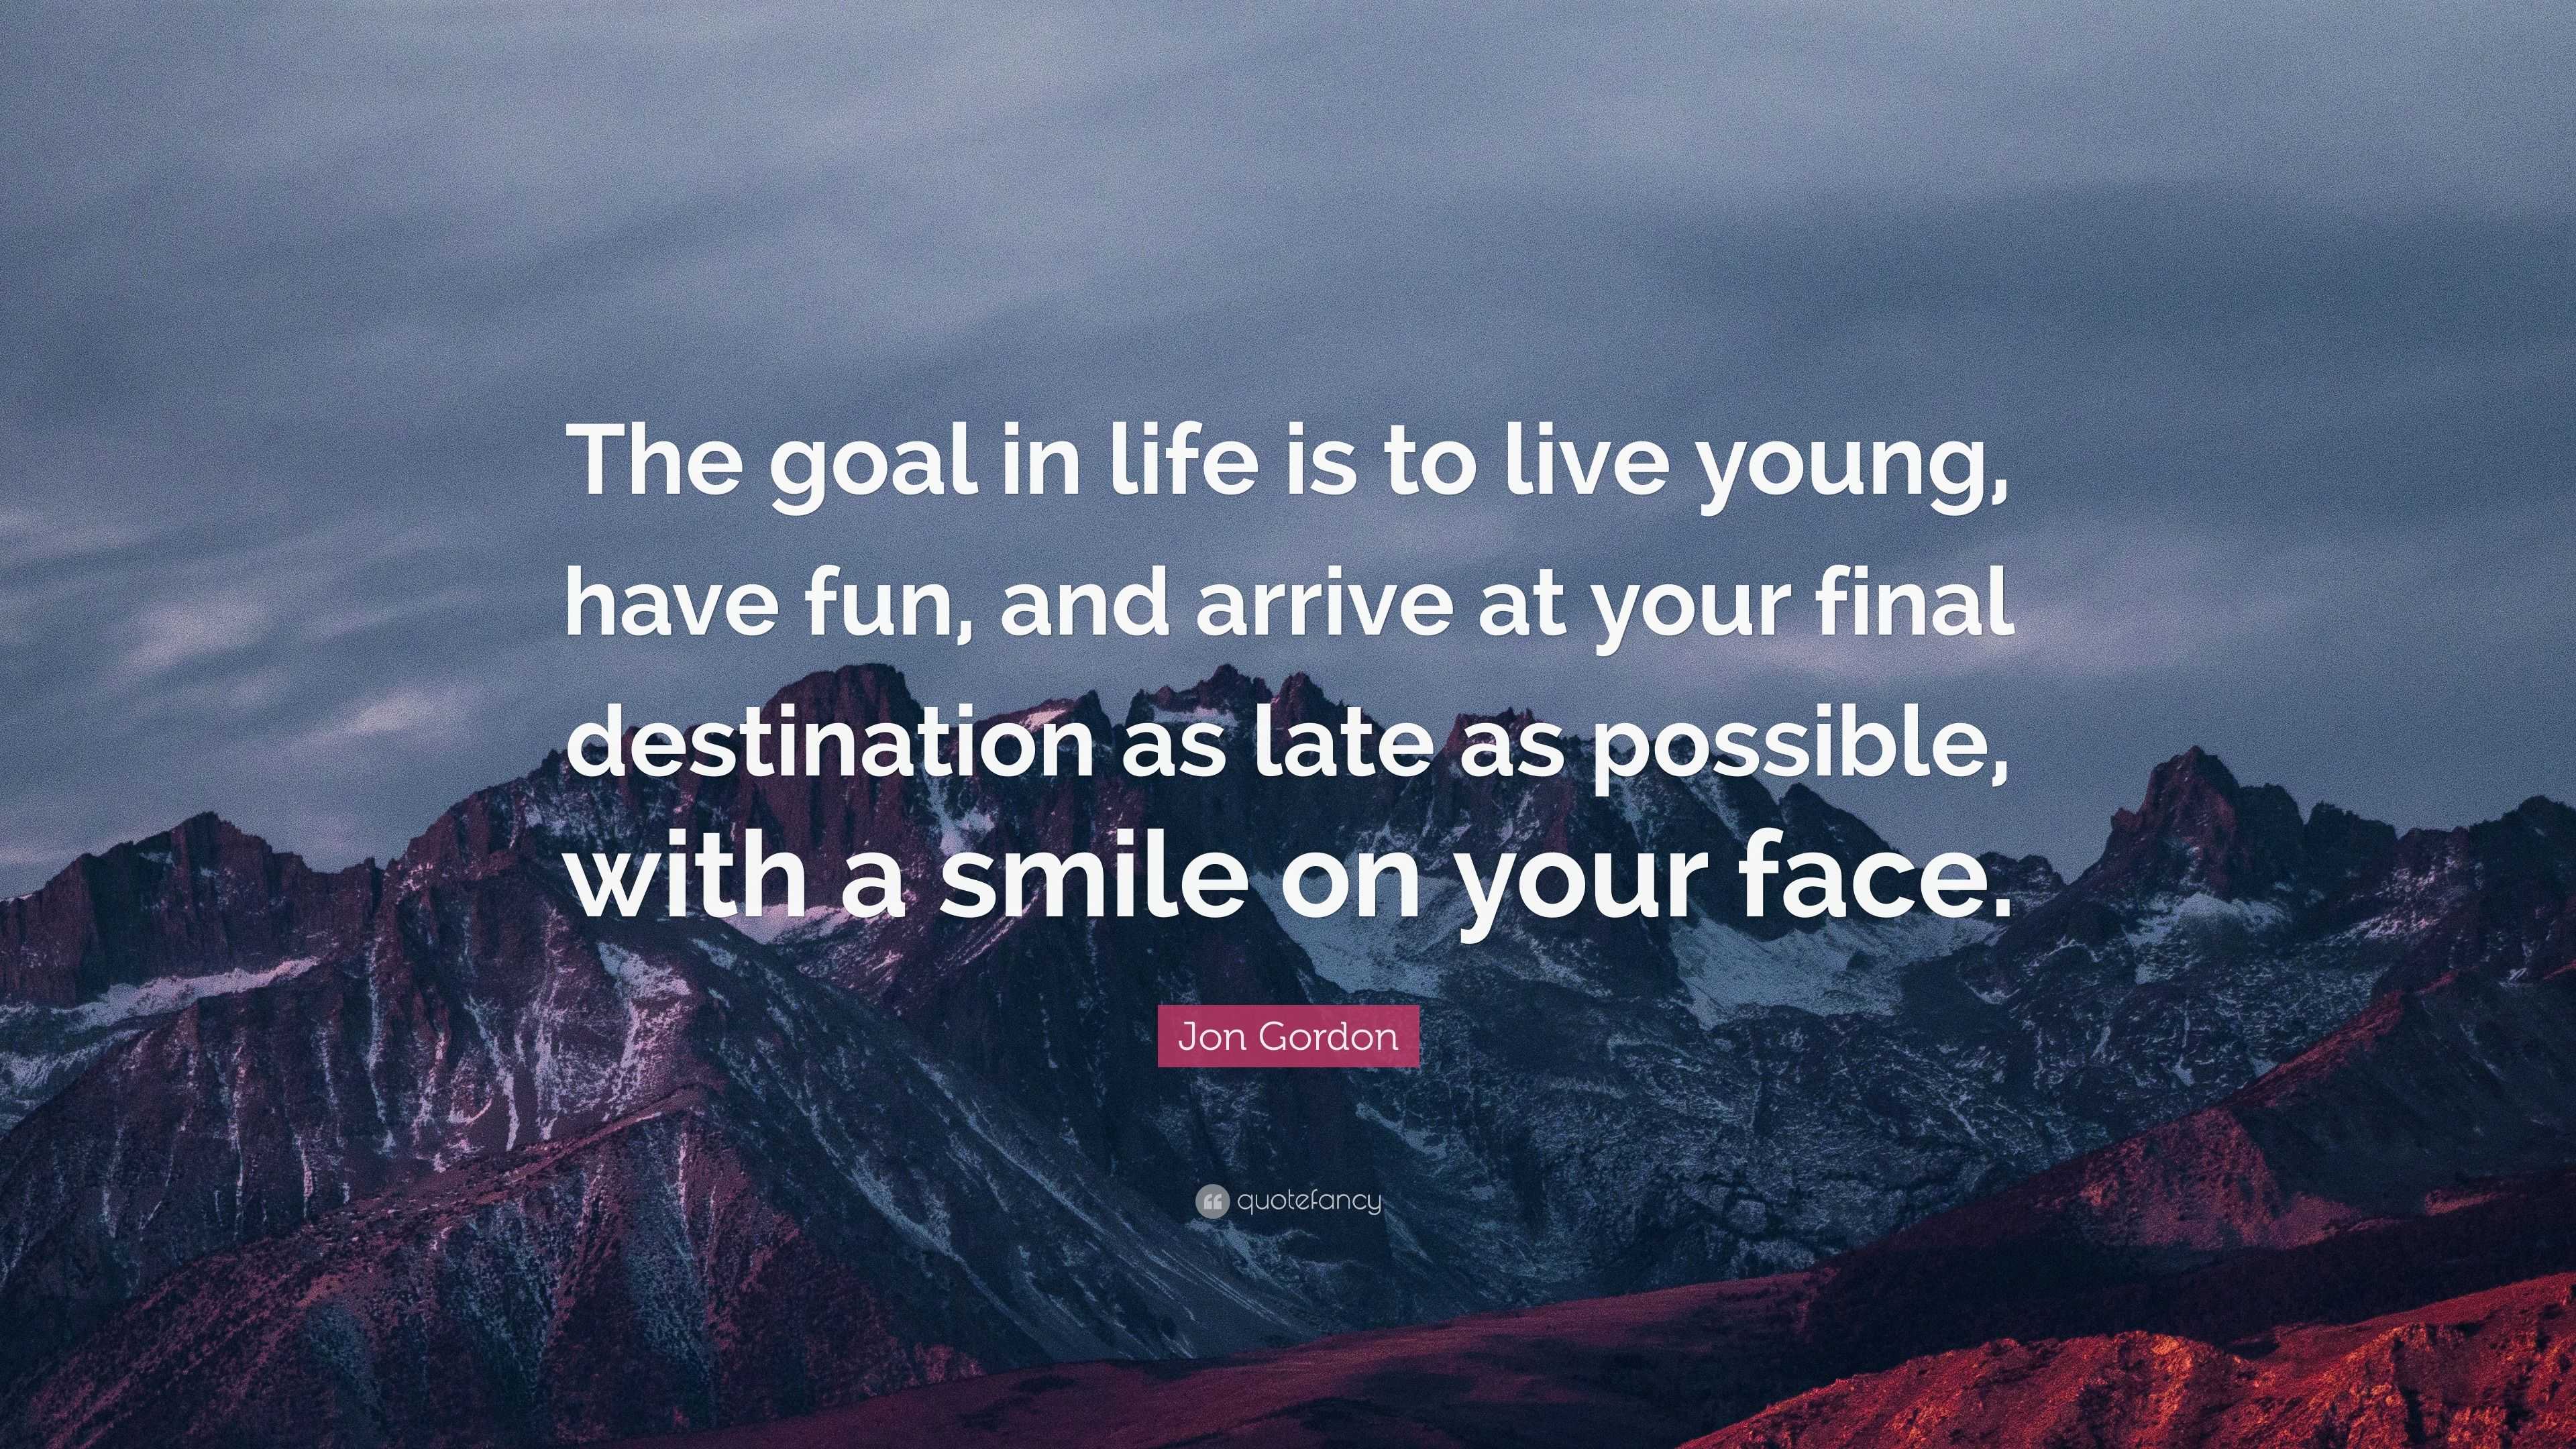 Jon Gordon Quote “The goal in life is to live young have fun